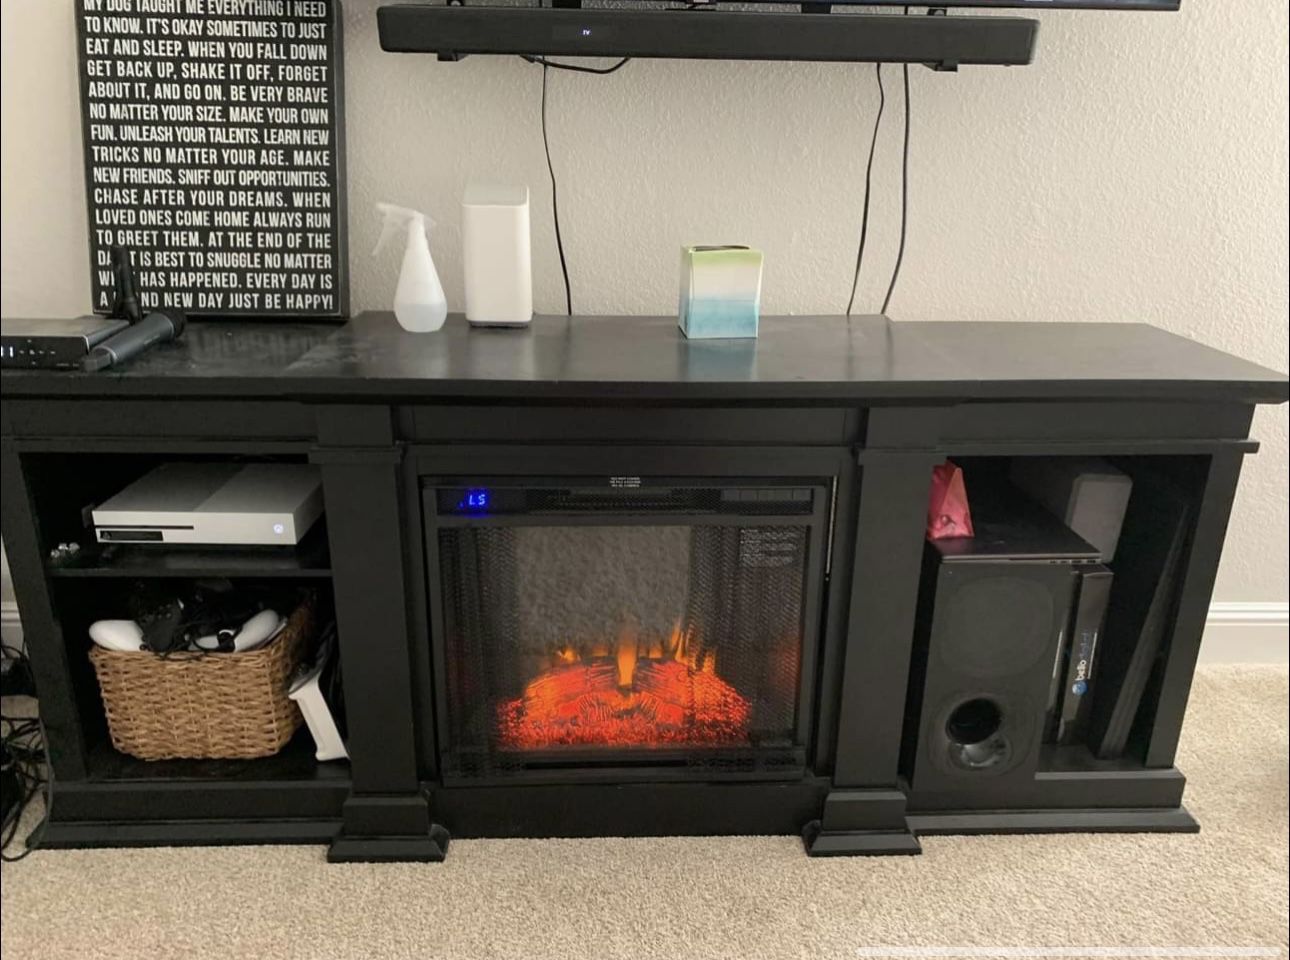 Electric Fireplace TV Stand